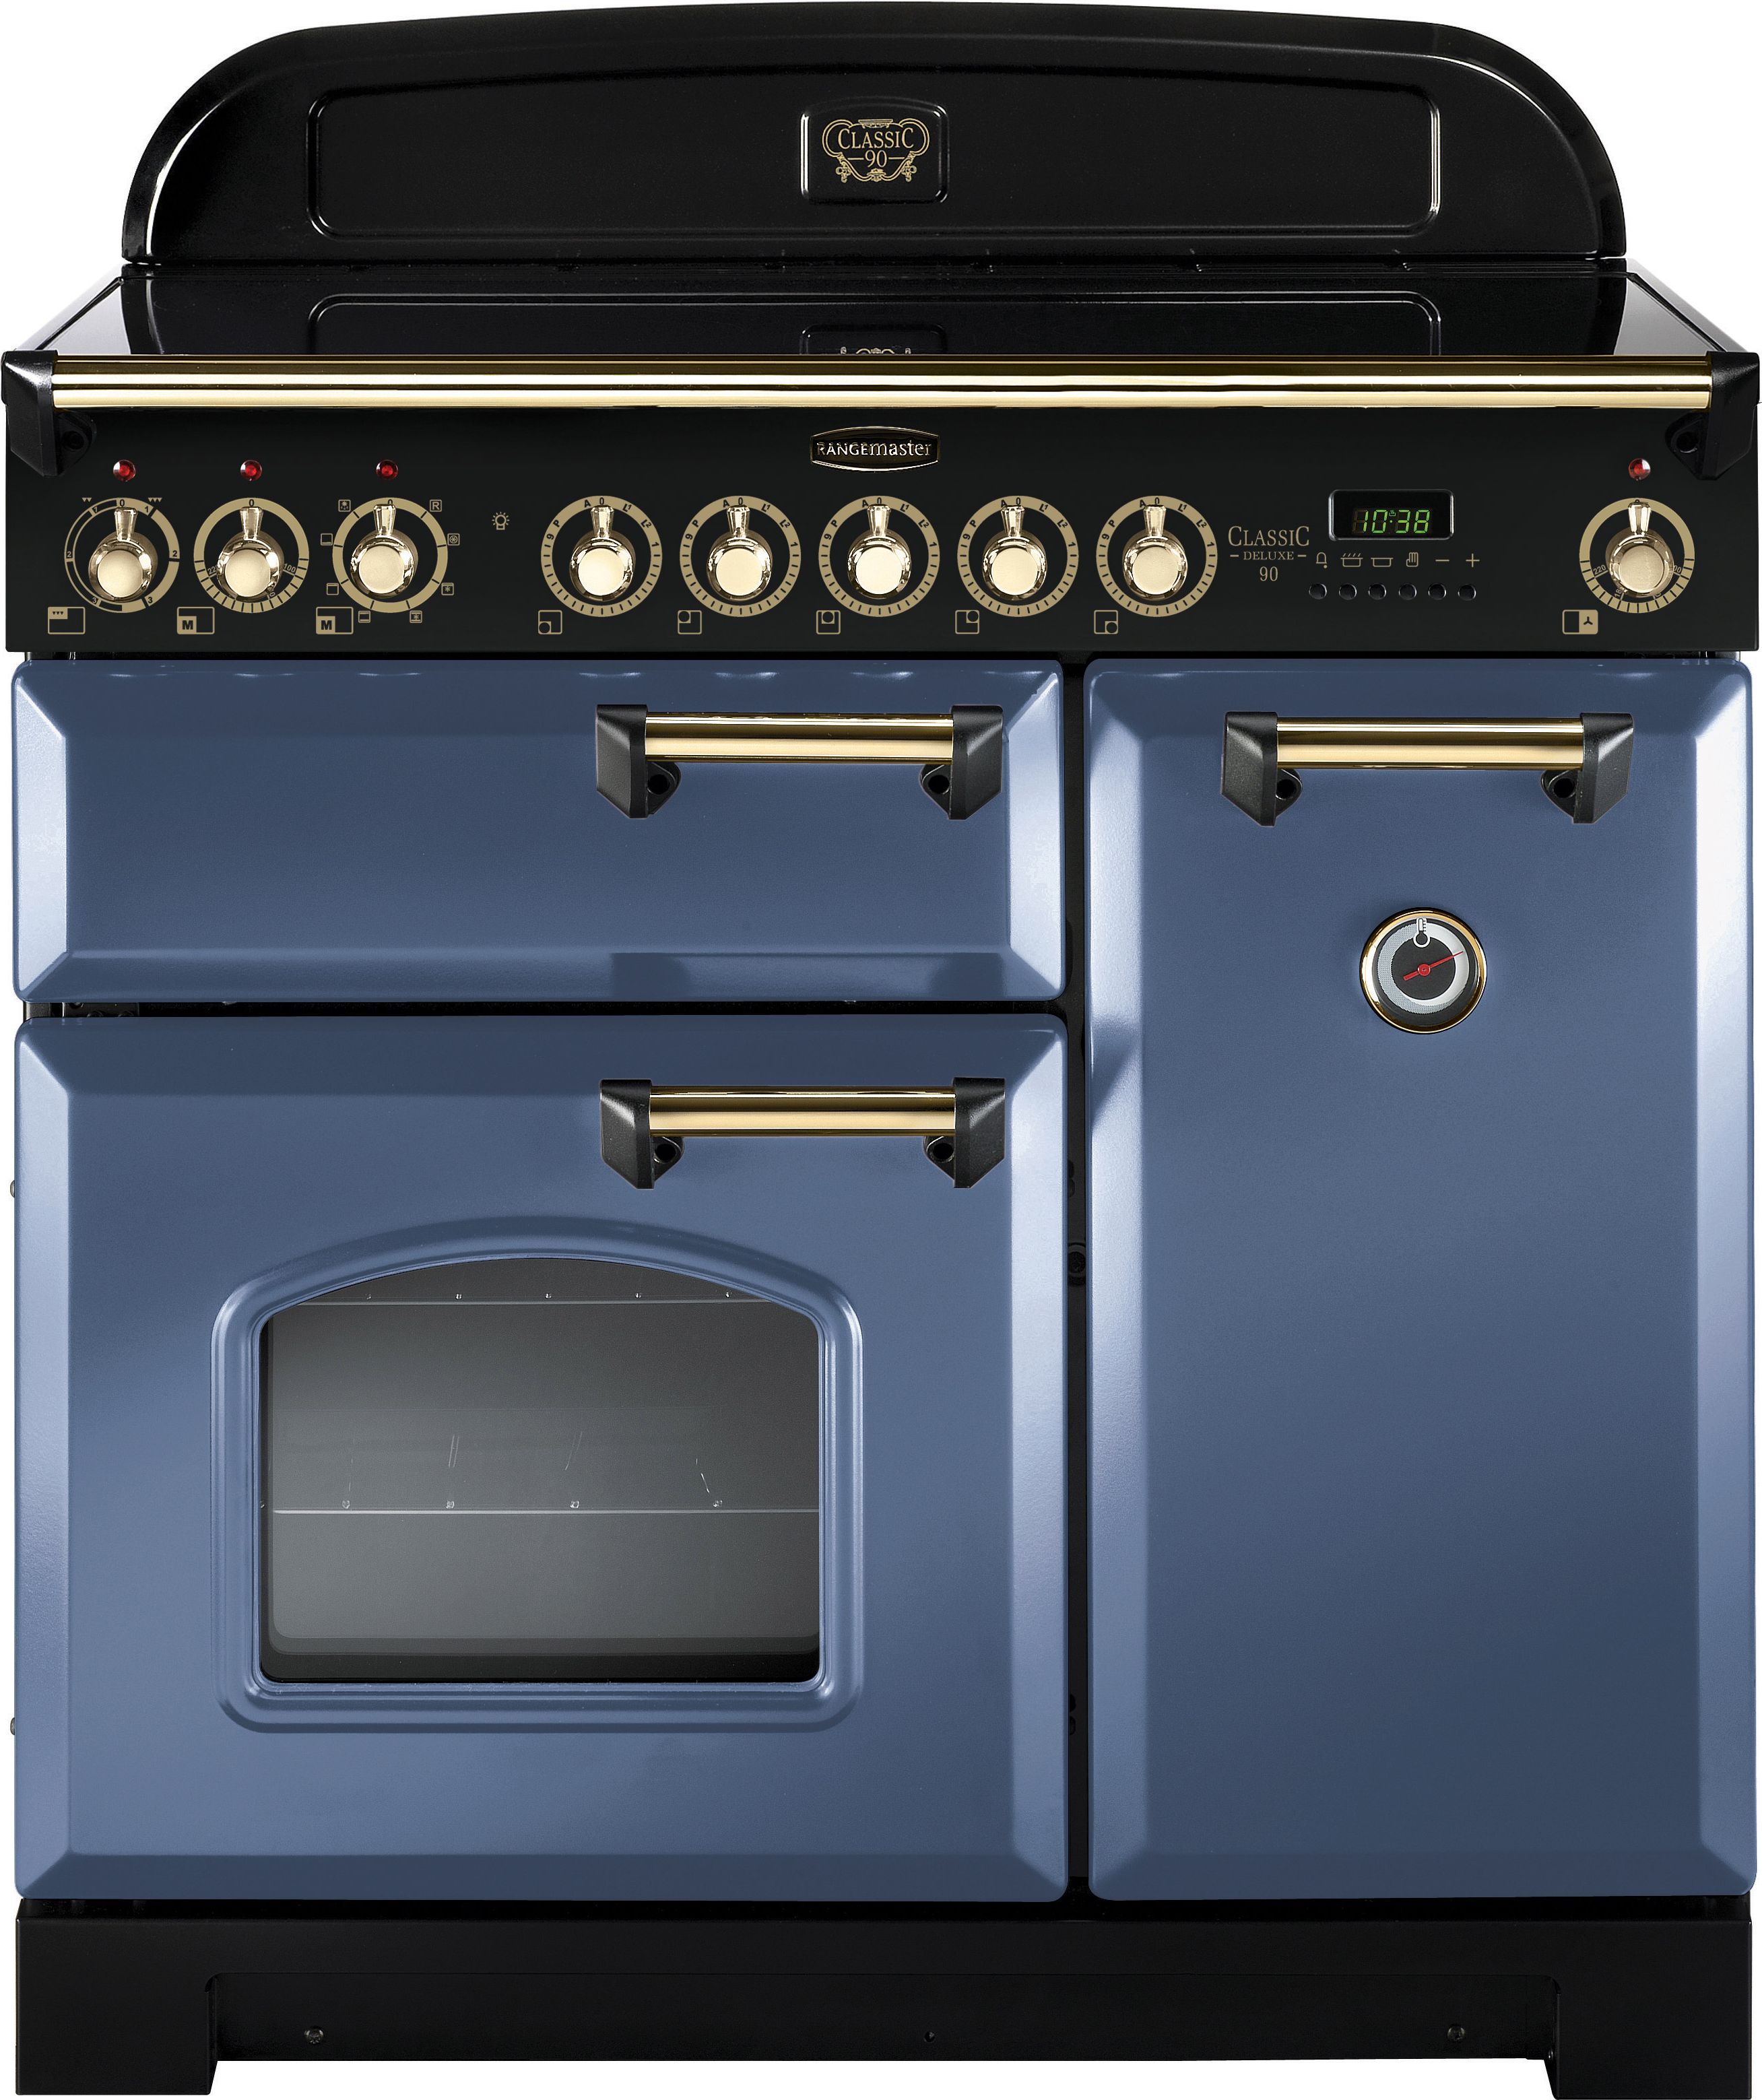 Rangemaster Classic Deluxe CDL90EISB/B 90cm Electric Range Cooker with Induction Hob - Stone Blue / Brass - A/A Rated, Blue